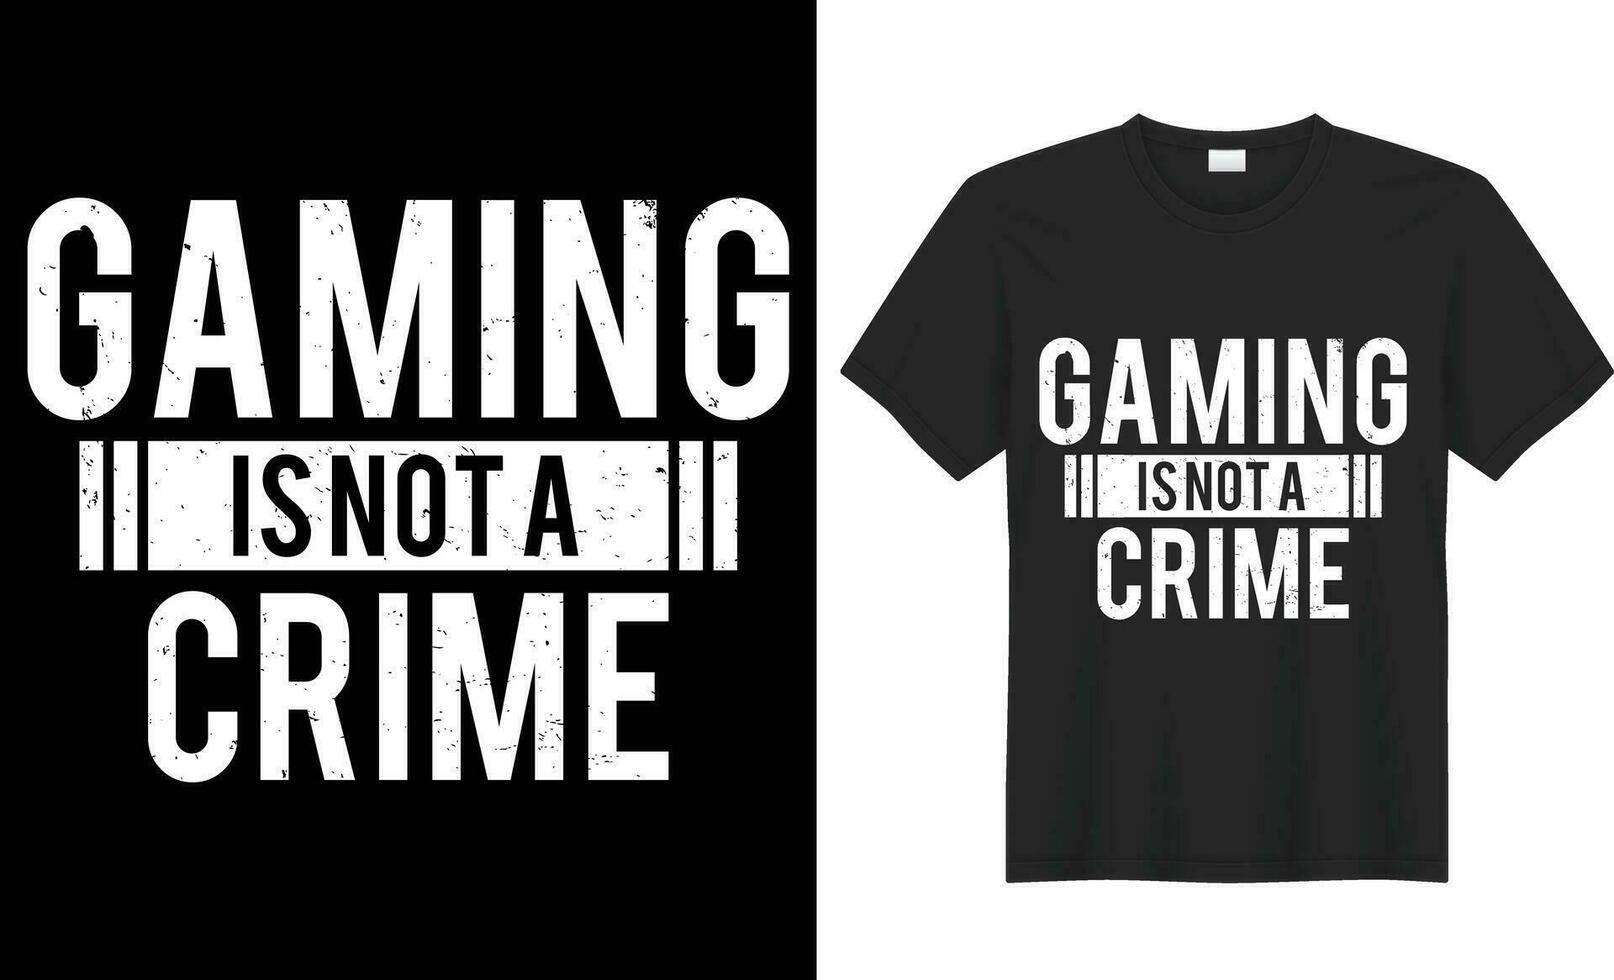 Gaming is not a crime typography vector t-shirt design. Perfect for print items and bags, mug, poster, banner. Handwritten vector illustration. Isolated on black background.